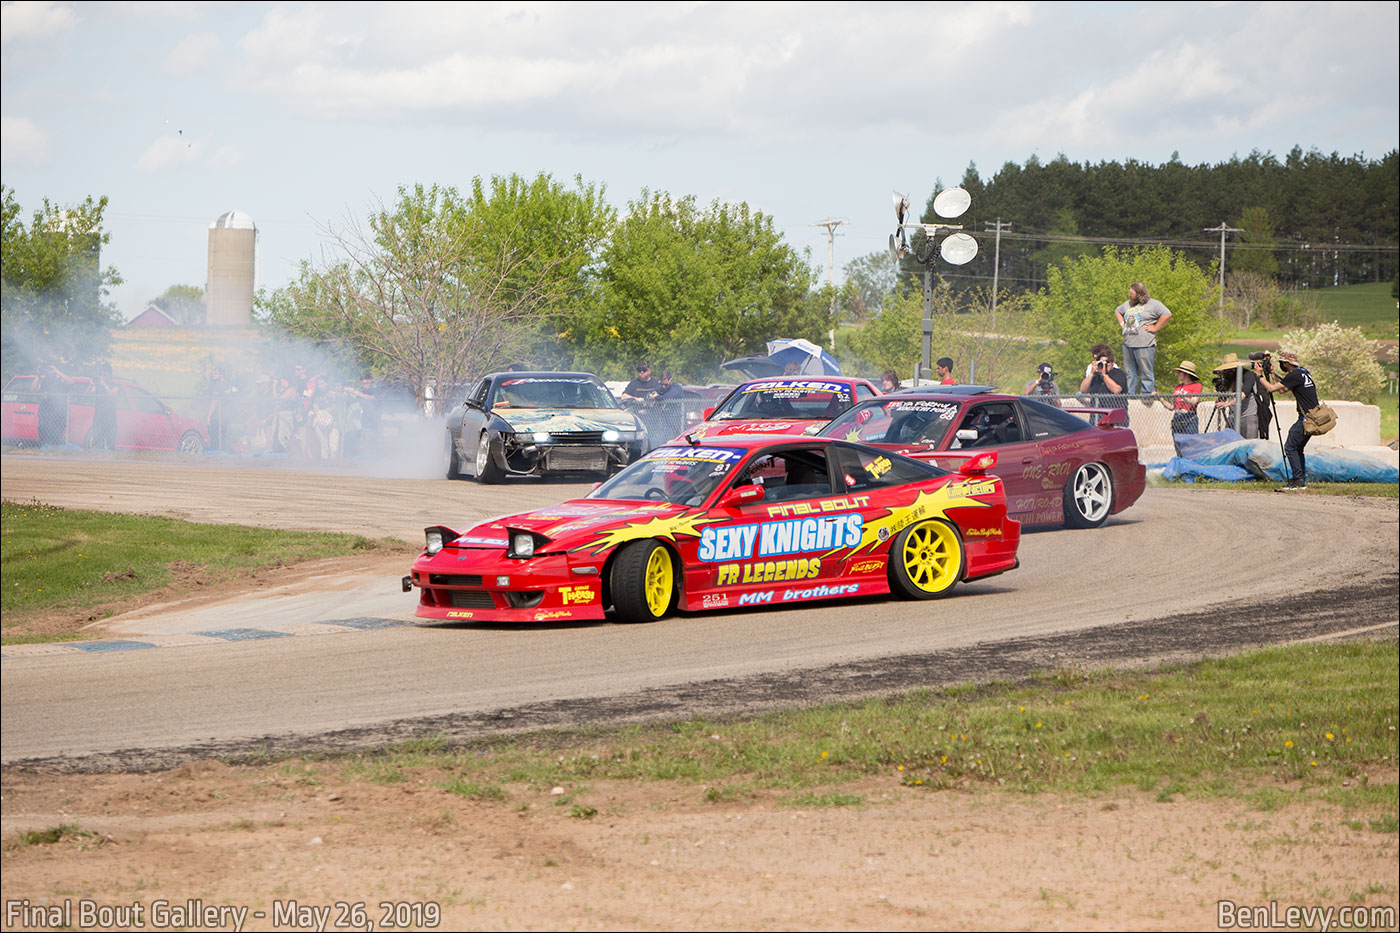 Drifting around the corner at Final Bout